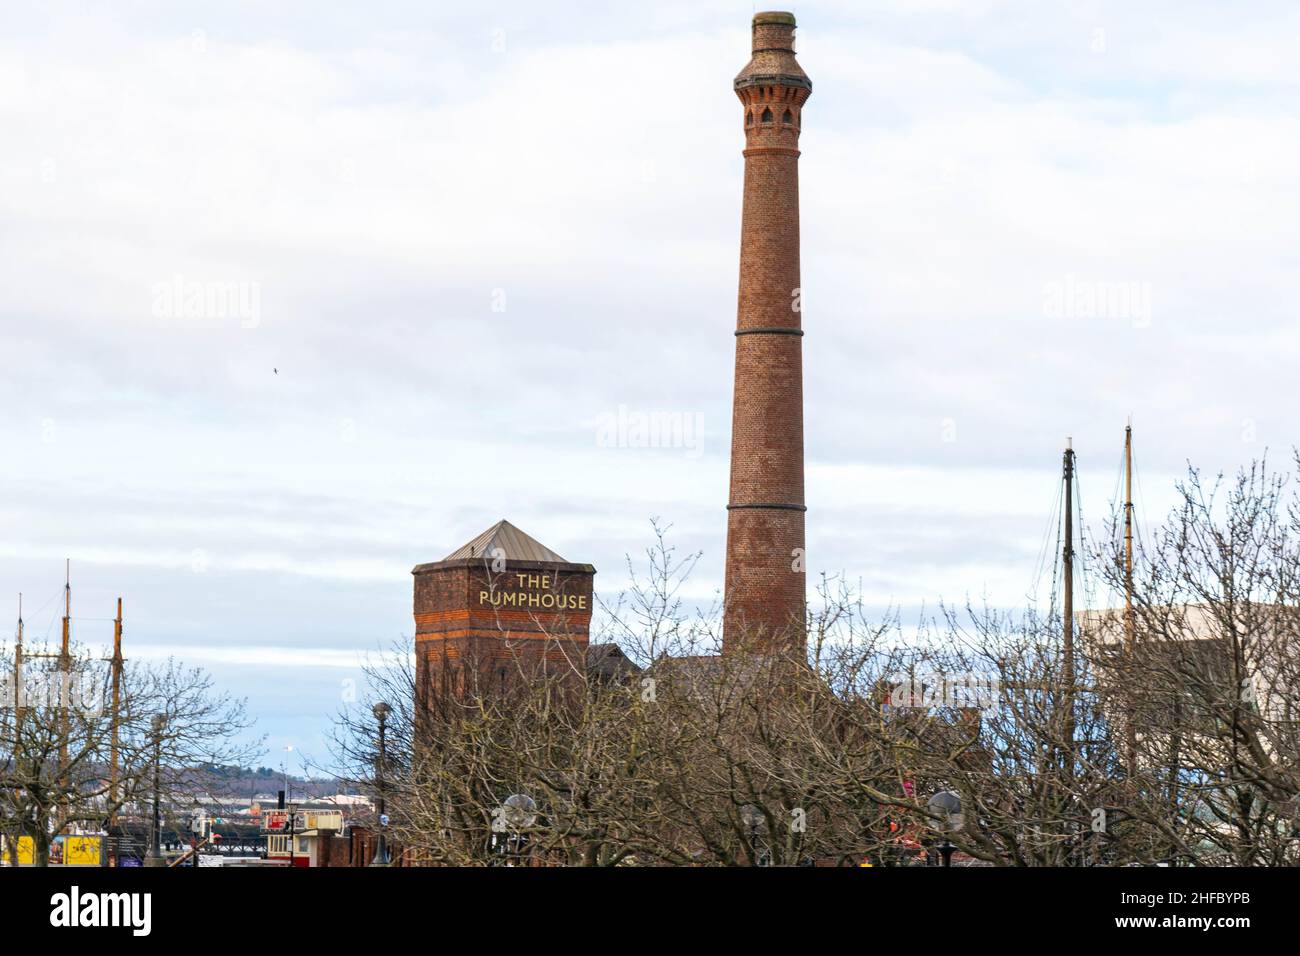 Liverpool, UK - 6 January 2020: The Pump house public bar and restaurant on the Merseyside waterfront near the Tate Museum in Liverpool city centre. Stock Photo